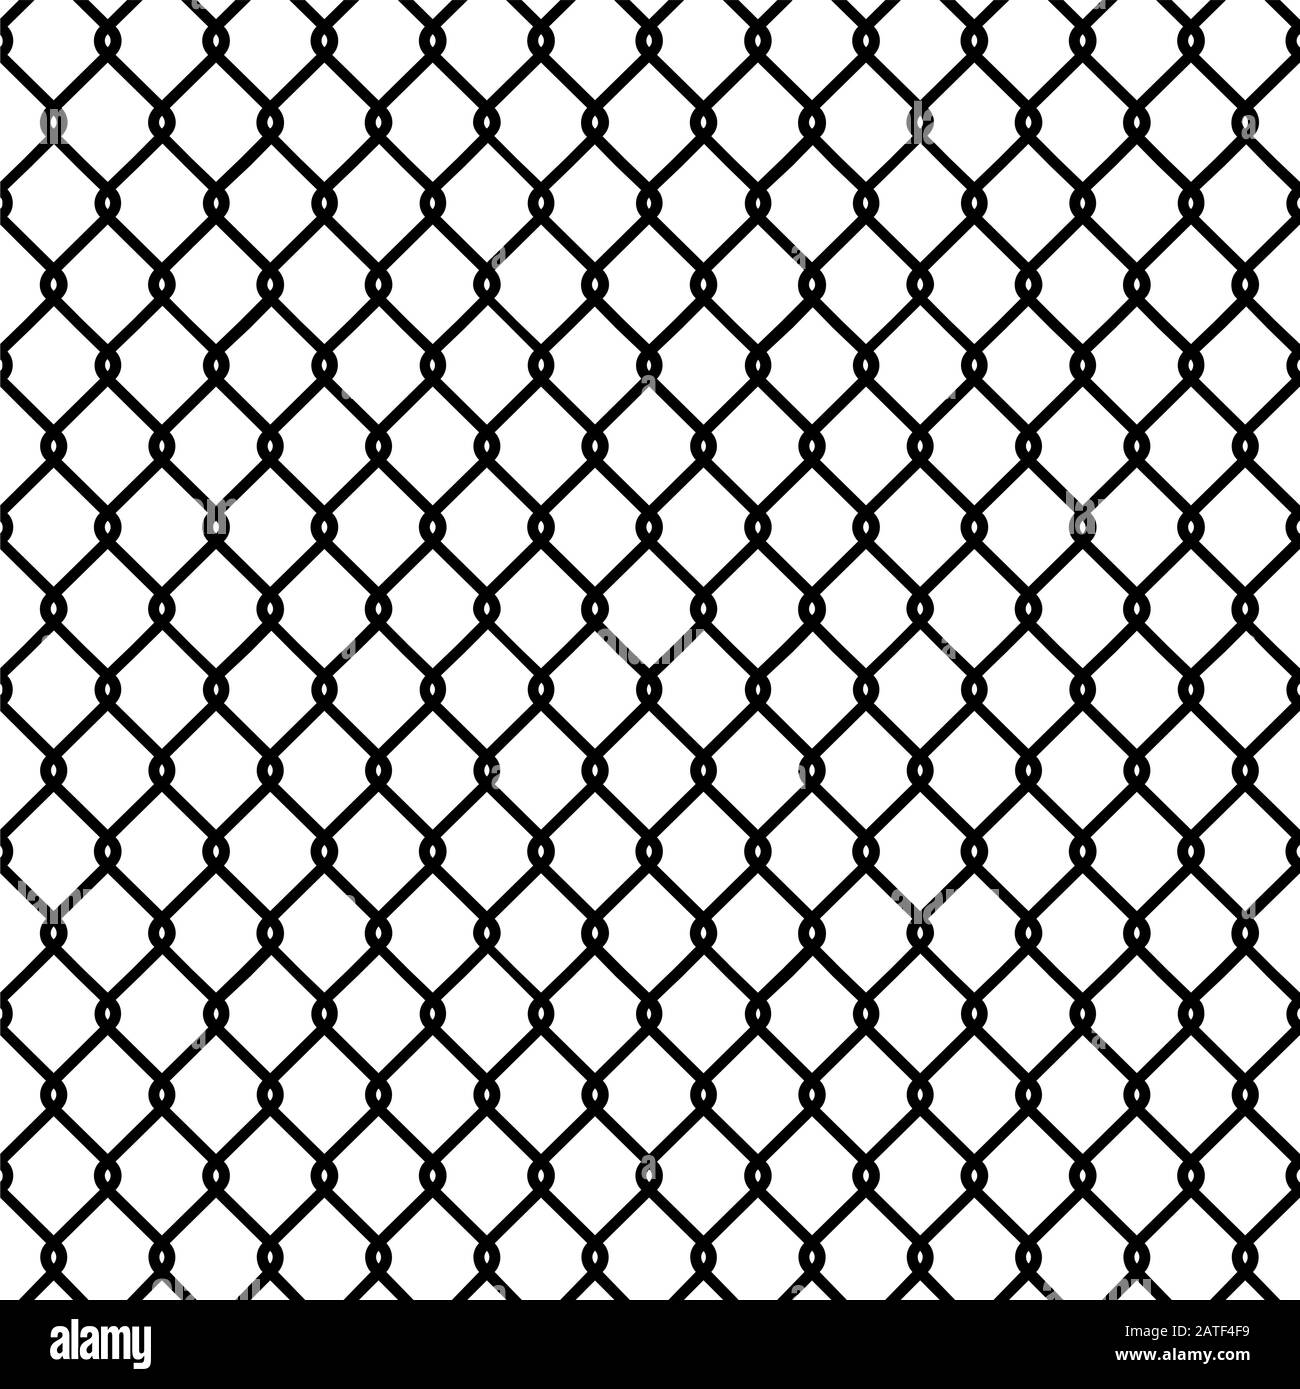 Seamless chain link fence pattern texture wallpaper Stock Vector